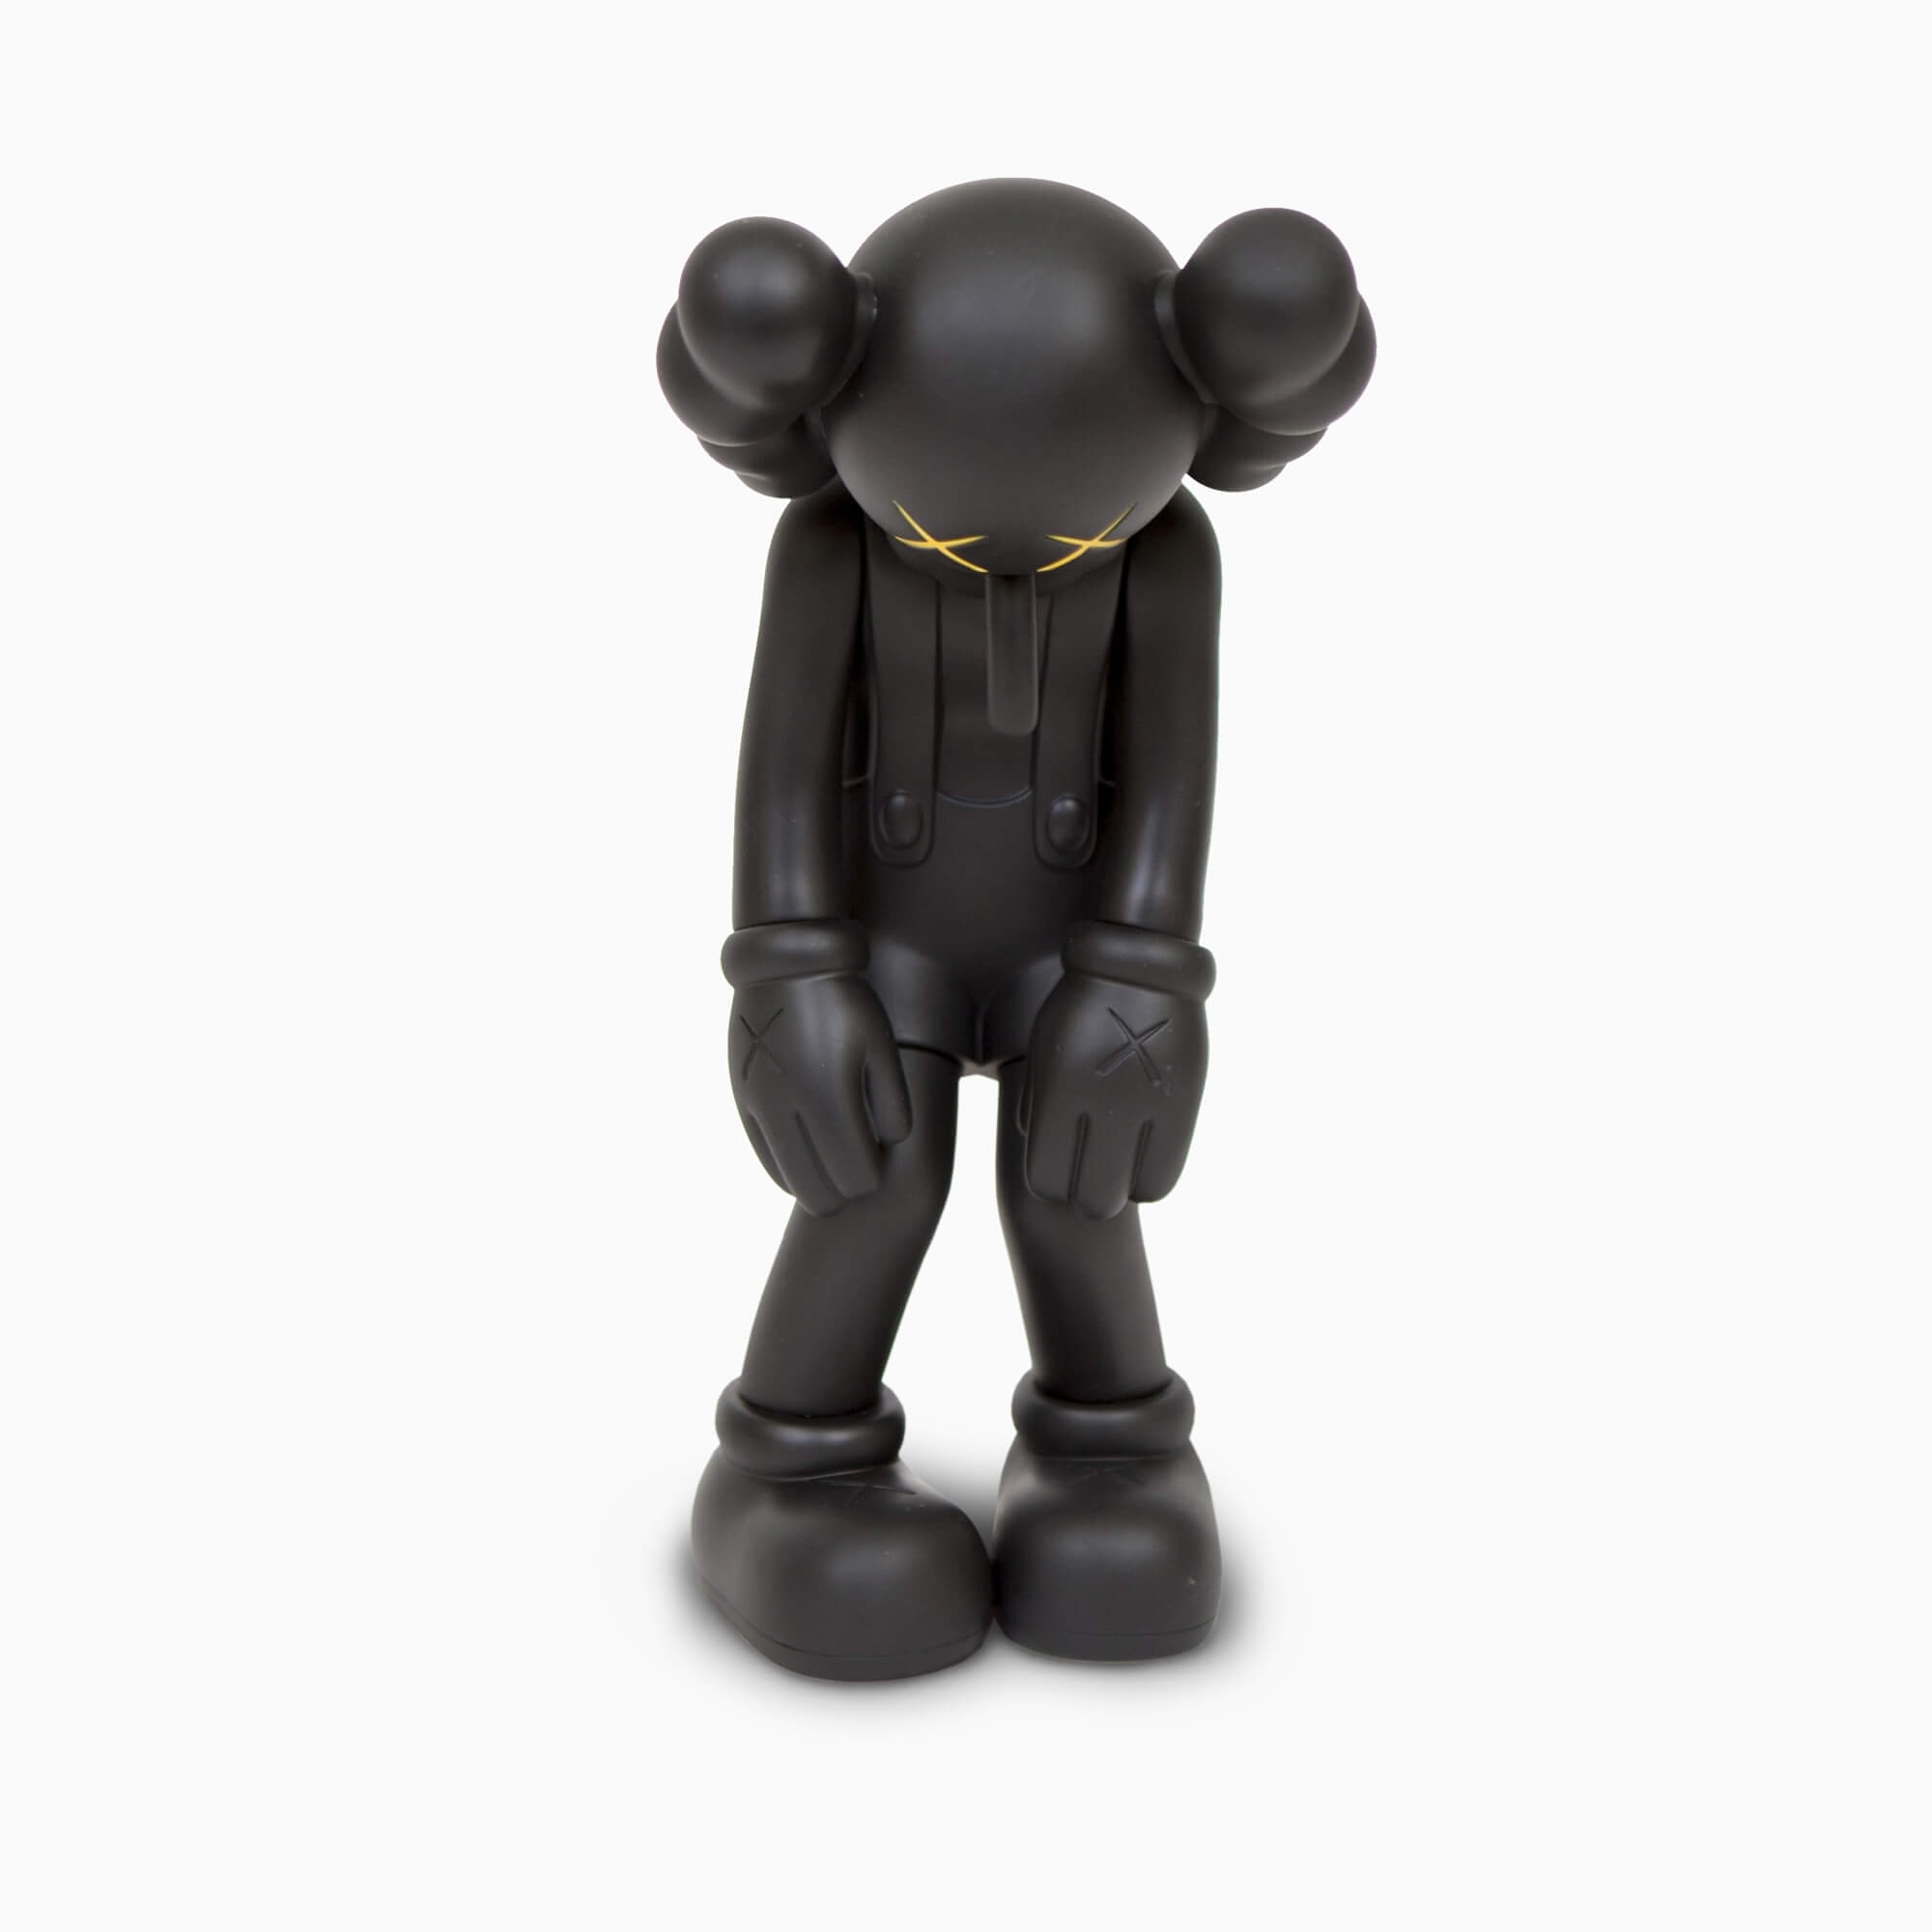 ysp-kaws-small-lie-open-edition